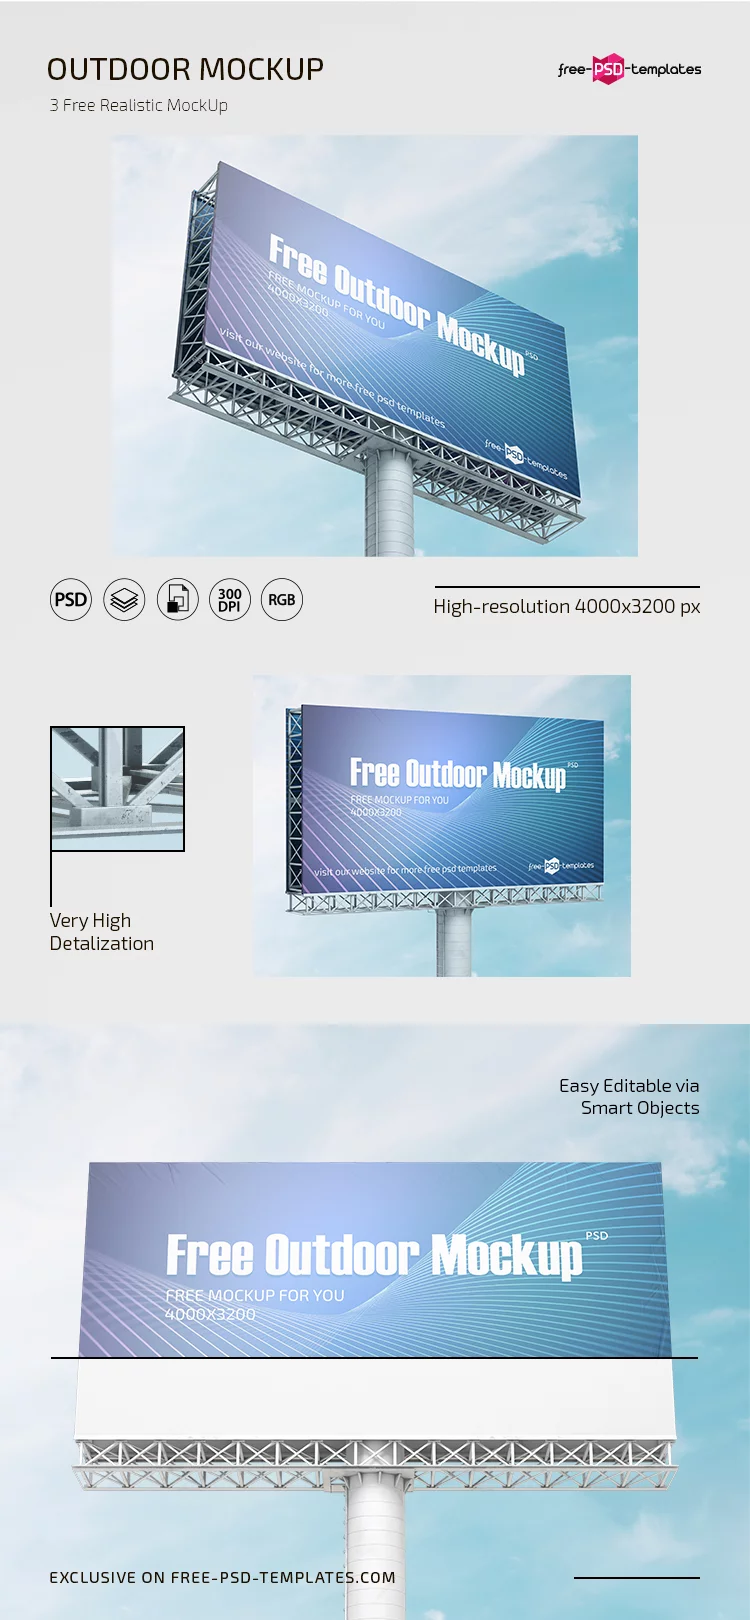 Free Outdoor Mockup in PSD